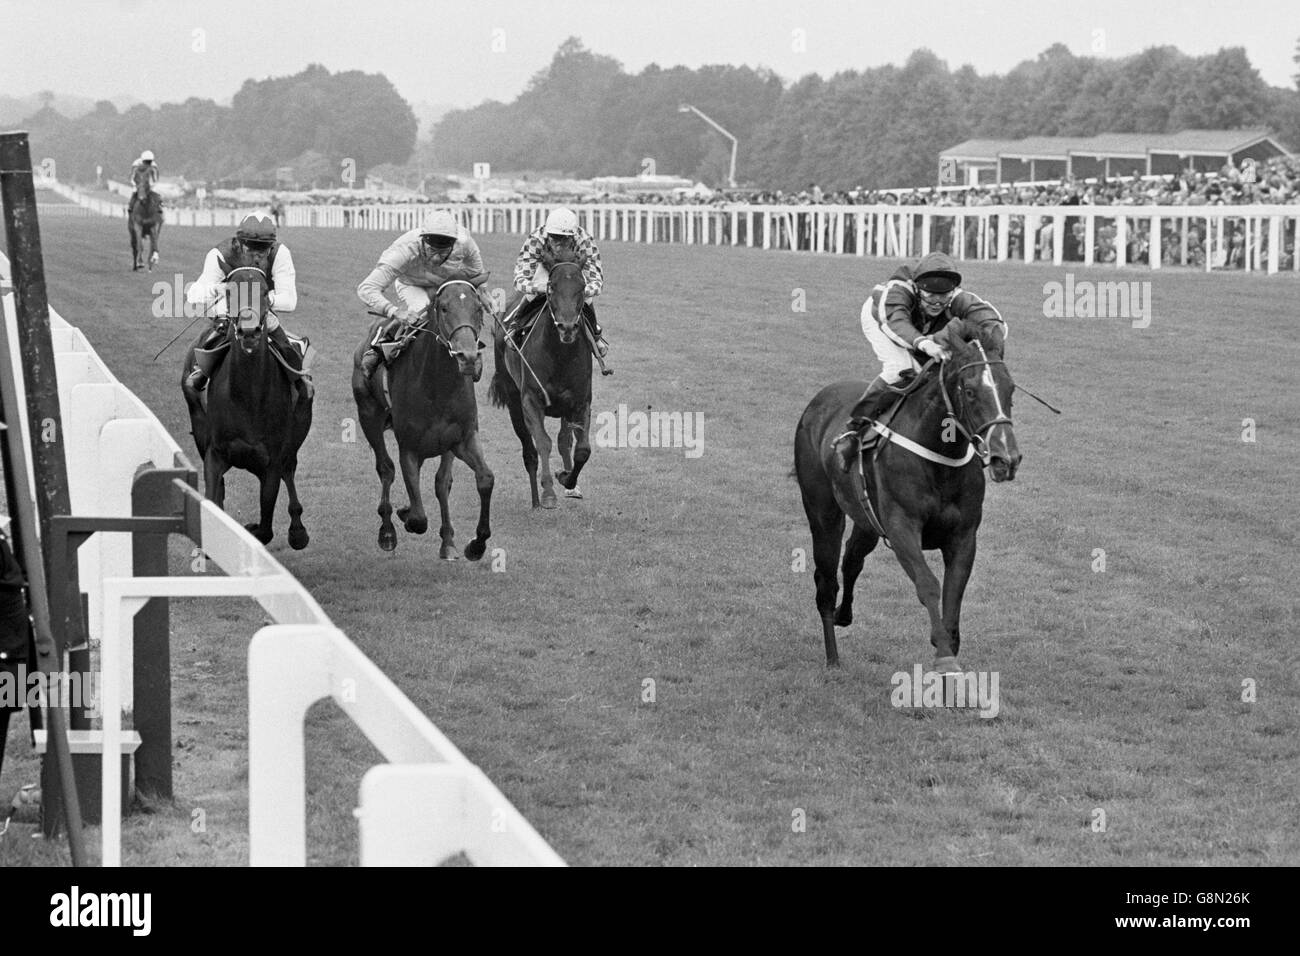 Royal Heroine (r), P Robinson up, comes home to win from Henry's Secret (l), Walter Swinburn up, and Bright Crocus (second l), Lester Piggott up Stock Photo